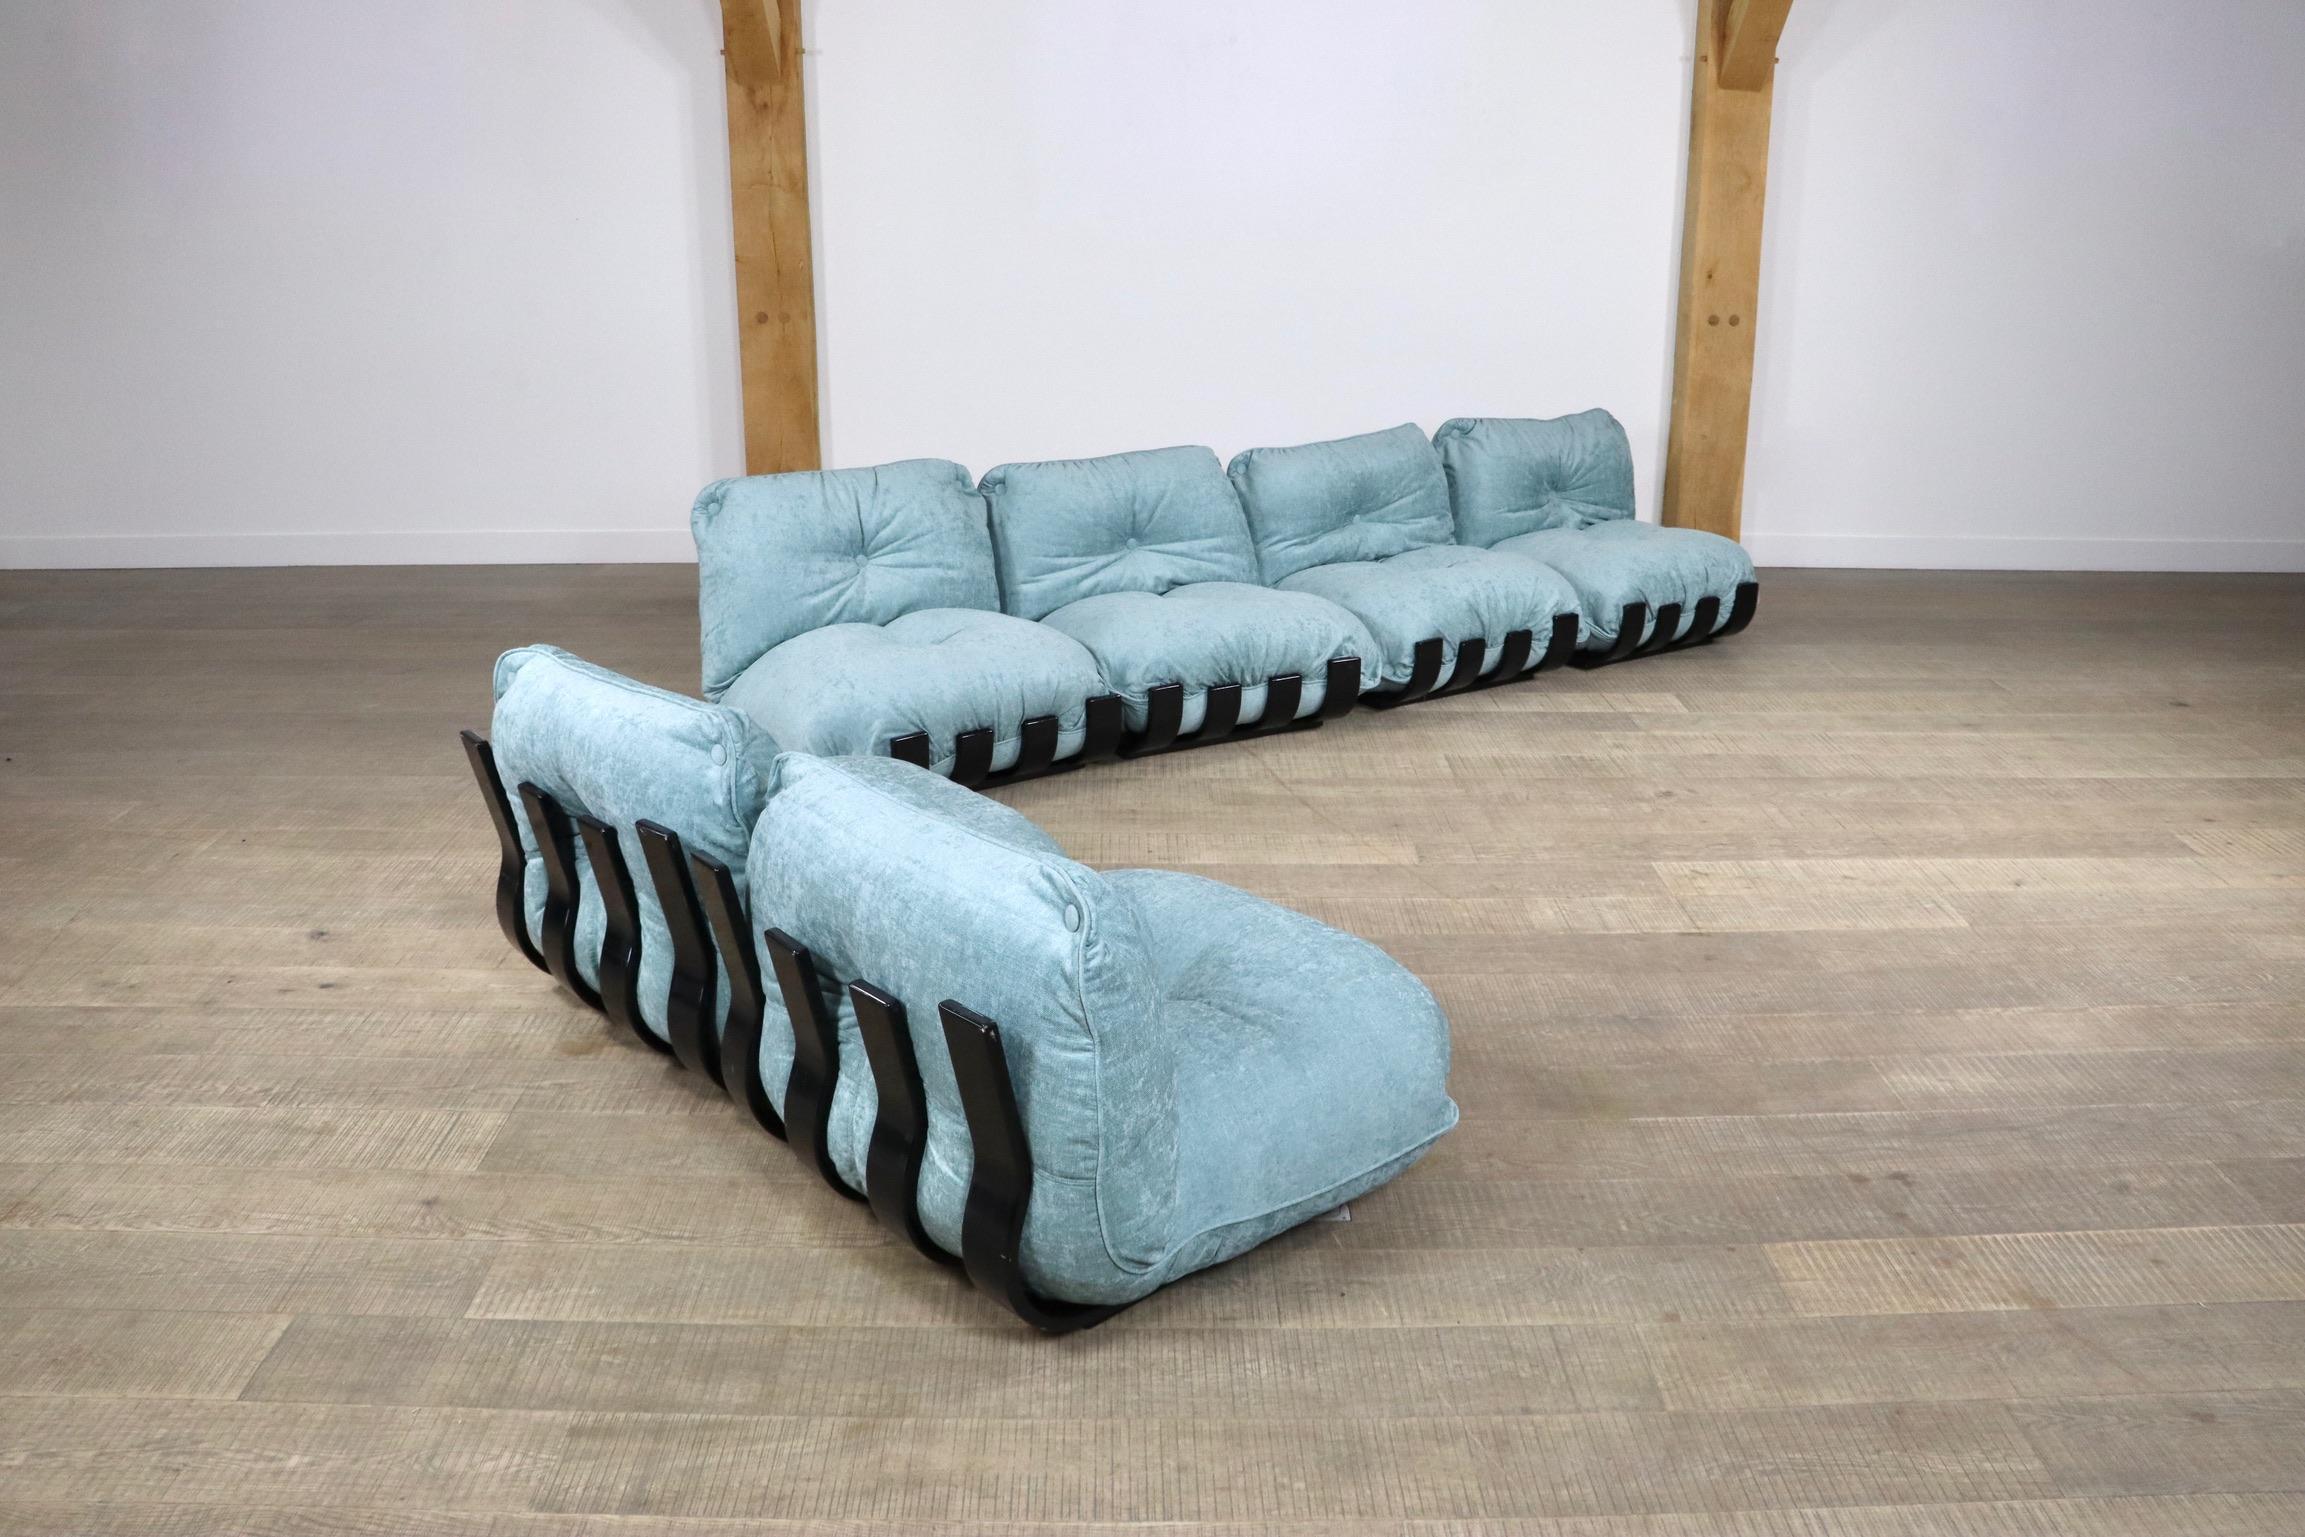 Mid-20th Century Sectional Gran Visir Sofa in Blue Velvet by Luciano Frigerio, Italy, 1970s For Sale